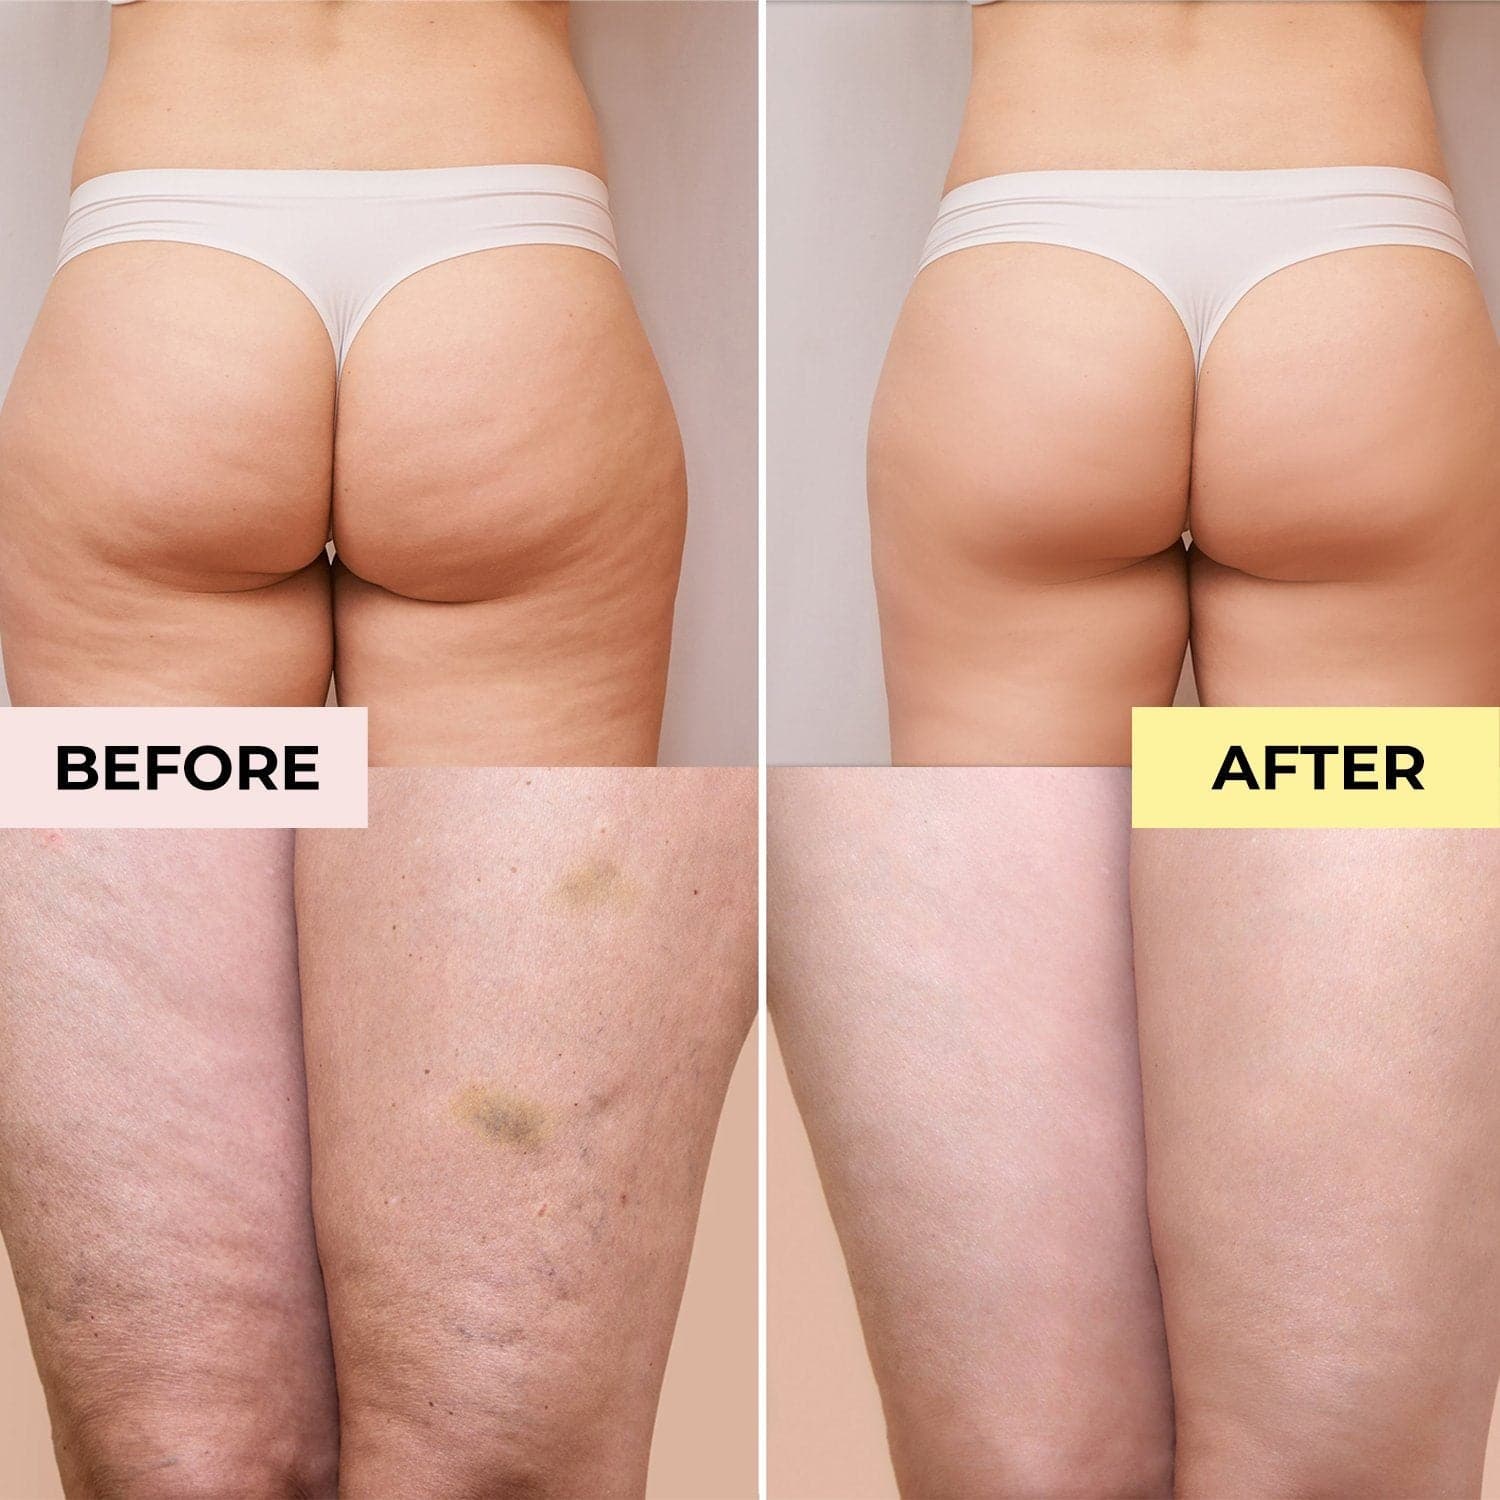 Life's Butter anti-Cellulite cream before and after results